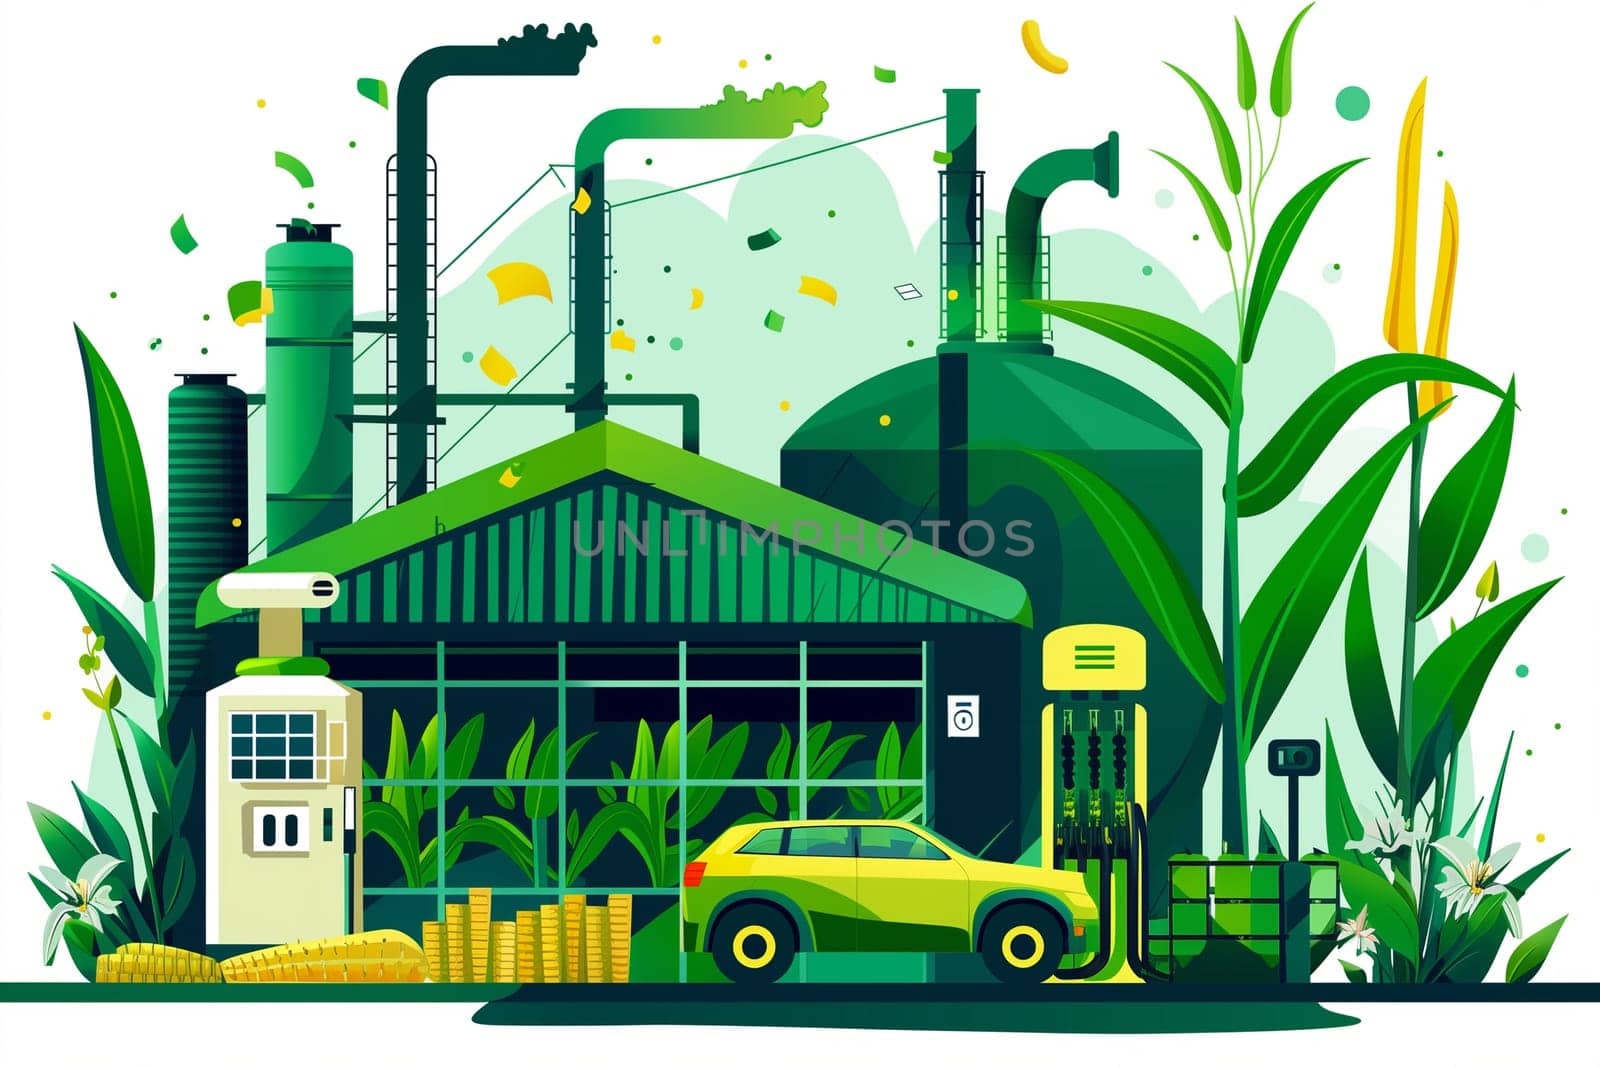 A vibrant illustration depicting a green energy biofuel production plant, with an electric car at a charging station, surrounded by corn, symbolizing sustainable fuel sources.